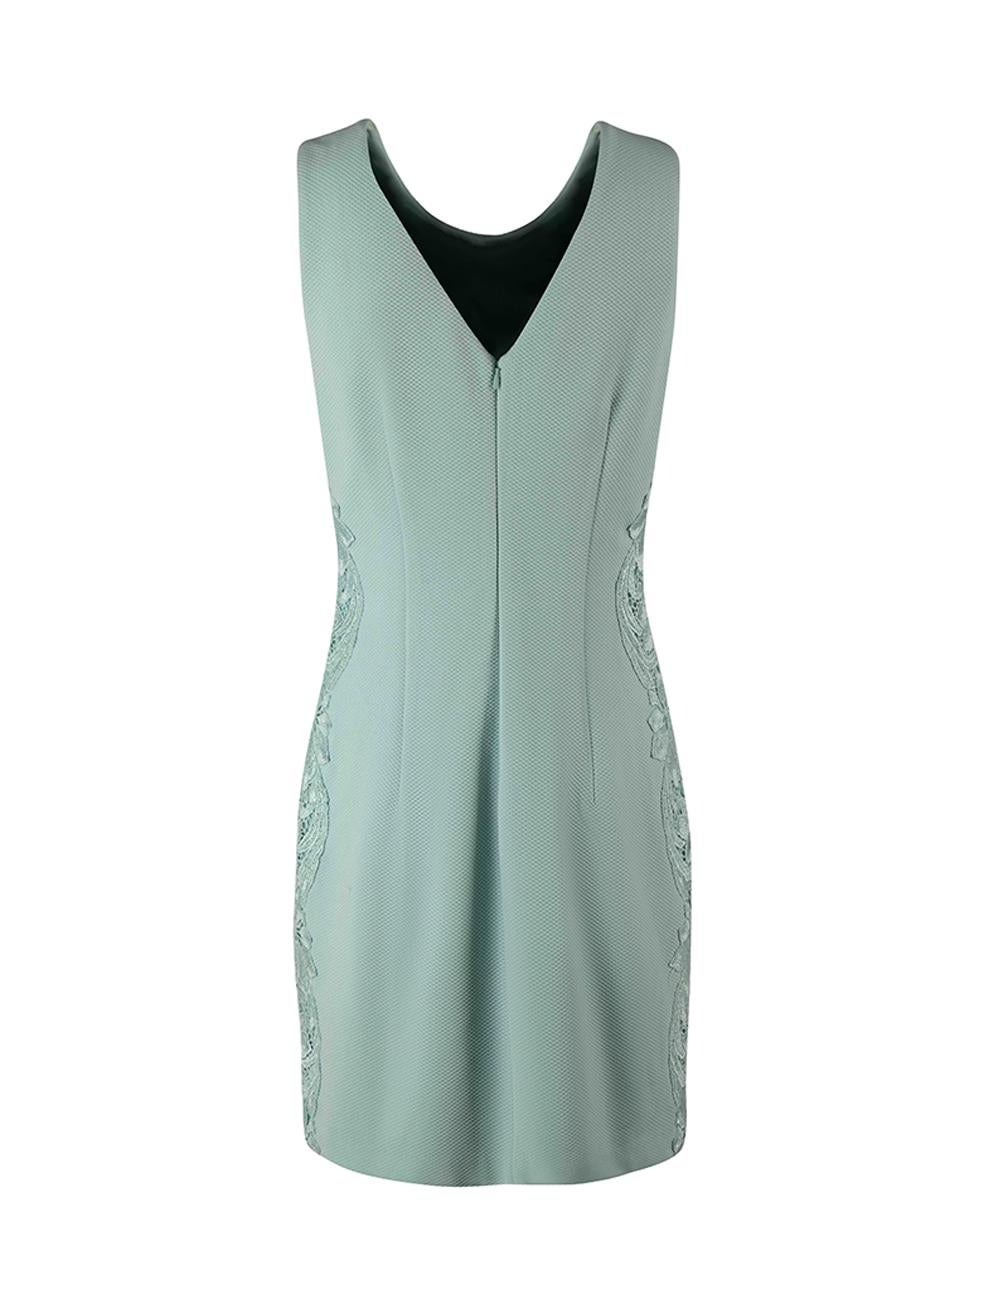 Belle Badgley Mischka Blue Lace Detail Textured Mini Dress Size XL In Good Condition For Sale In London, GB